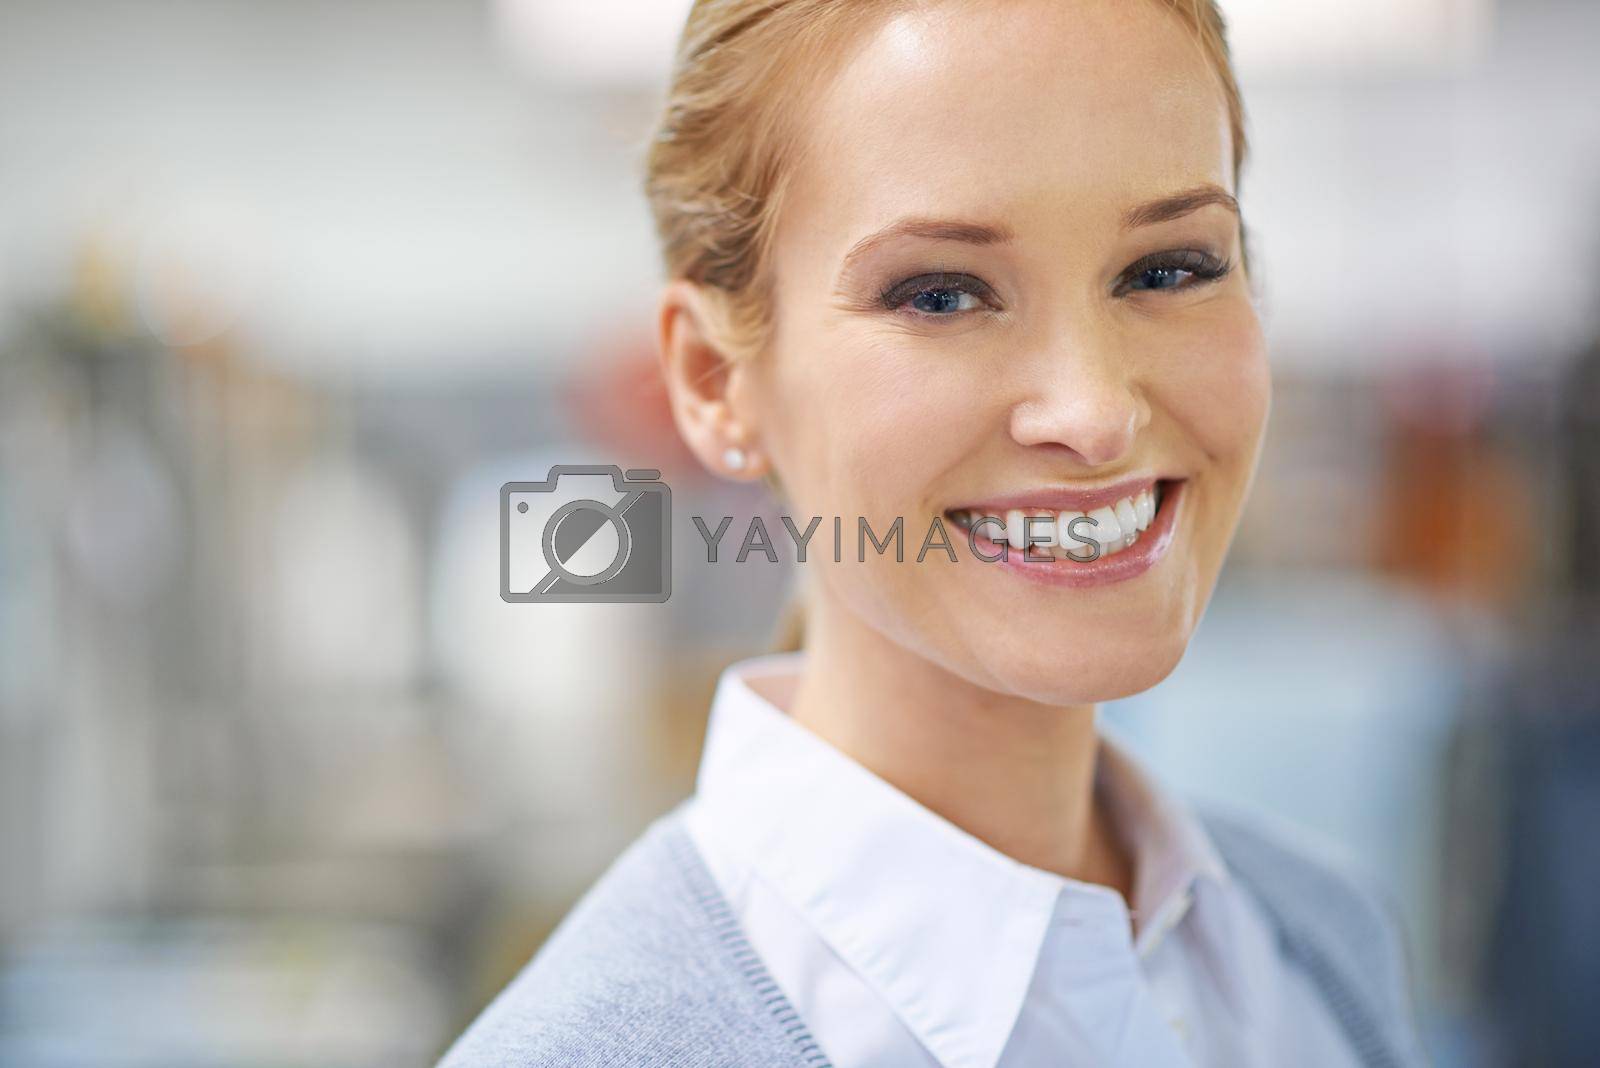 Royalty free image of All smiles on the factory floor. Portrait of a smiling young manager standing on the printing factory floor. by YuriArcurs